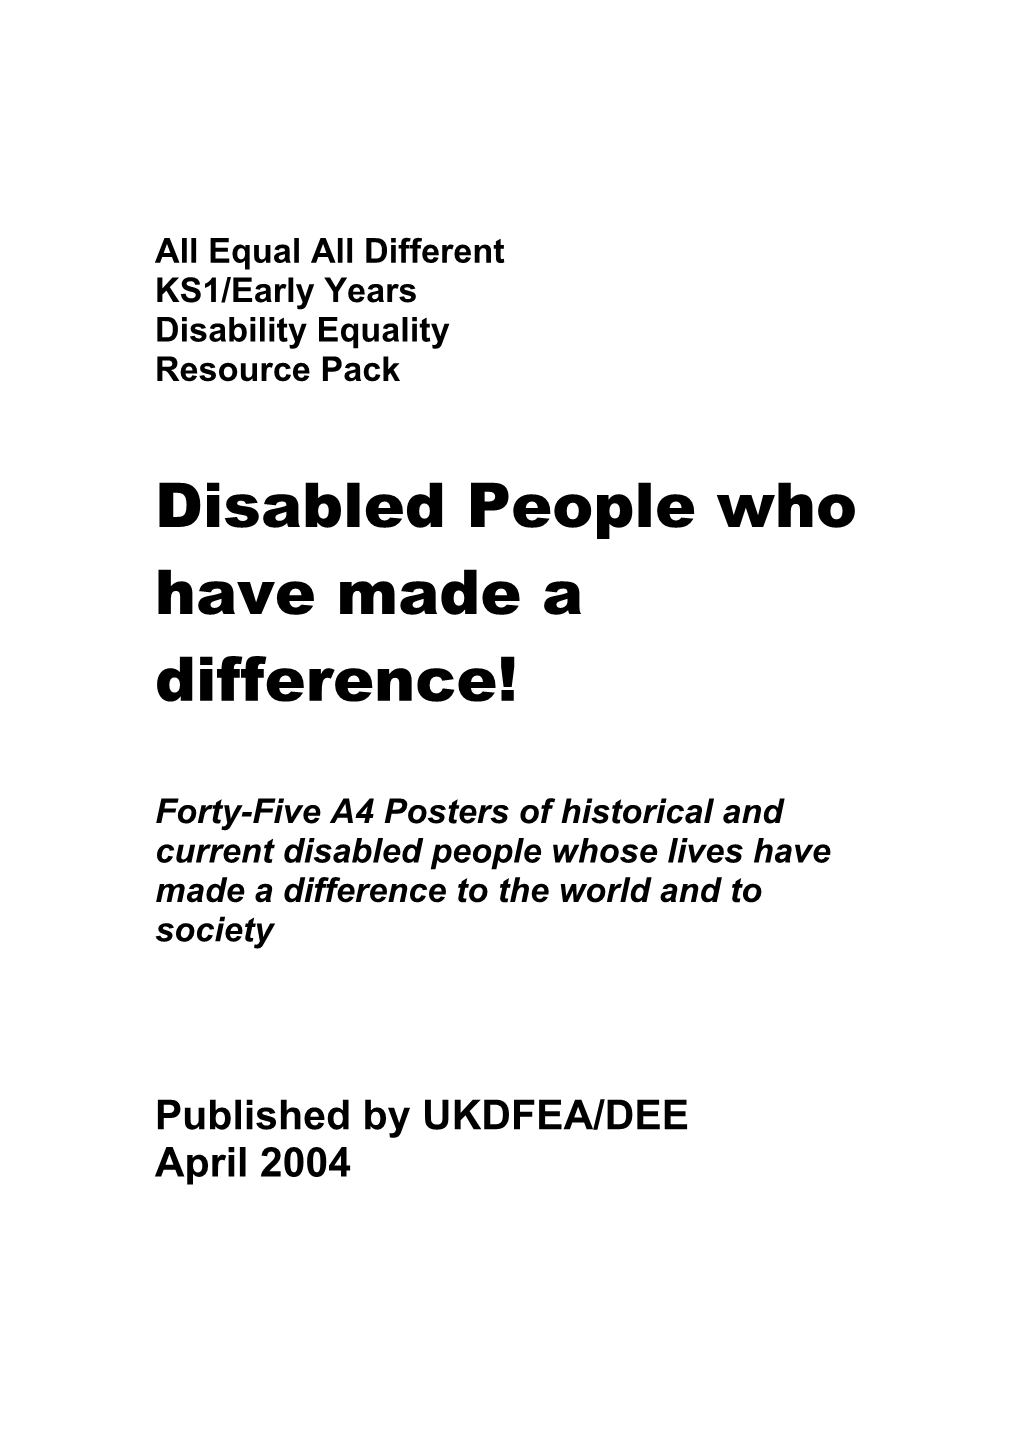 Disabled People Who Made a Difference